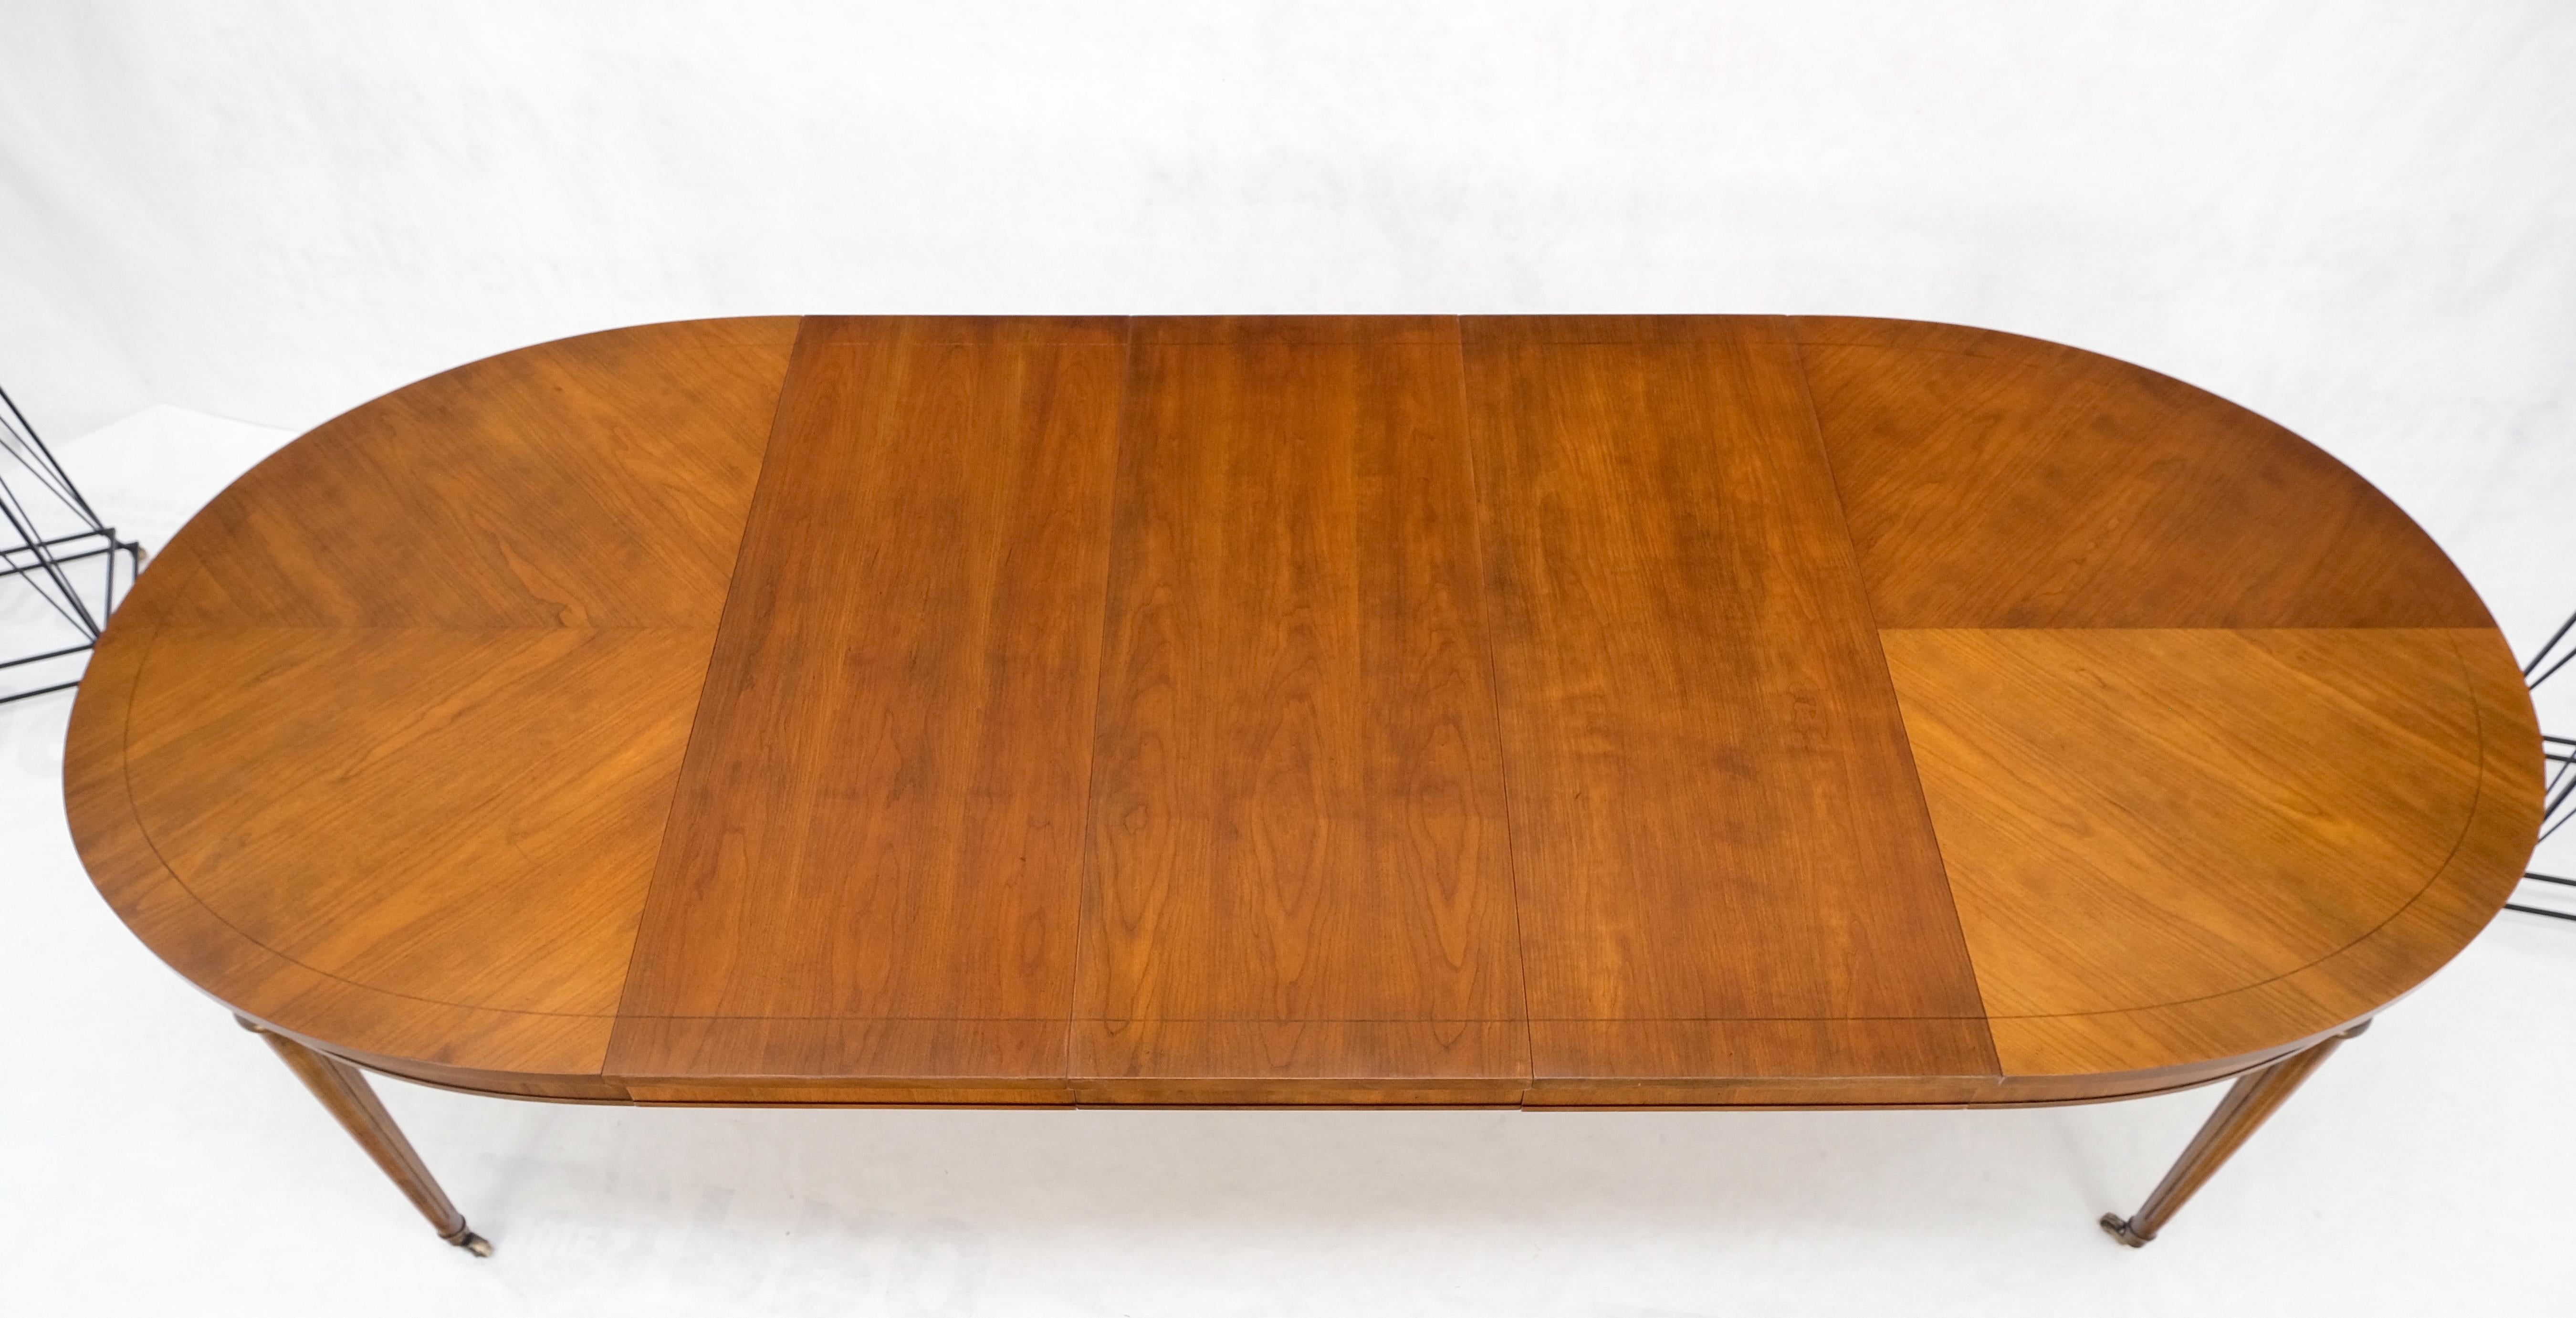 American Mid-Century Oval Satinwood DiningTable 3 Leaves Fluted Tapered Leg Mint For Sale 3